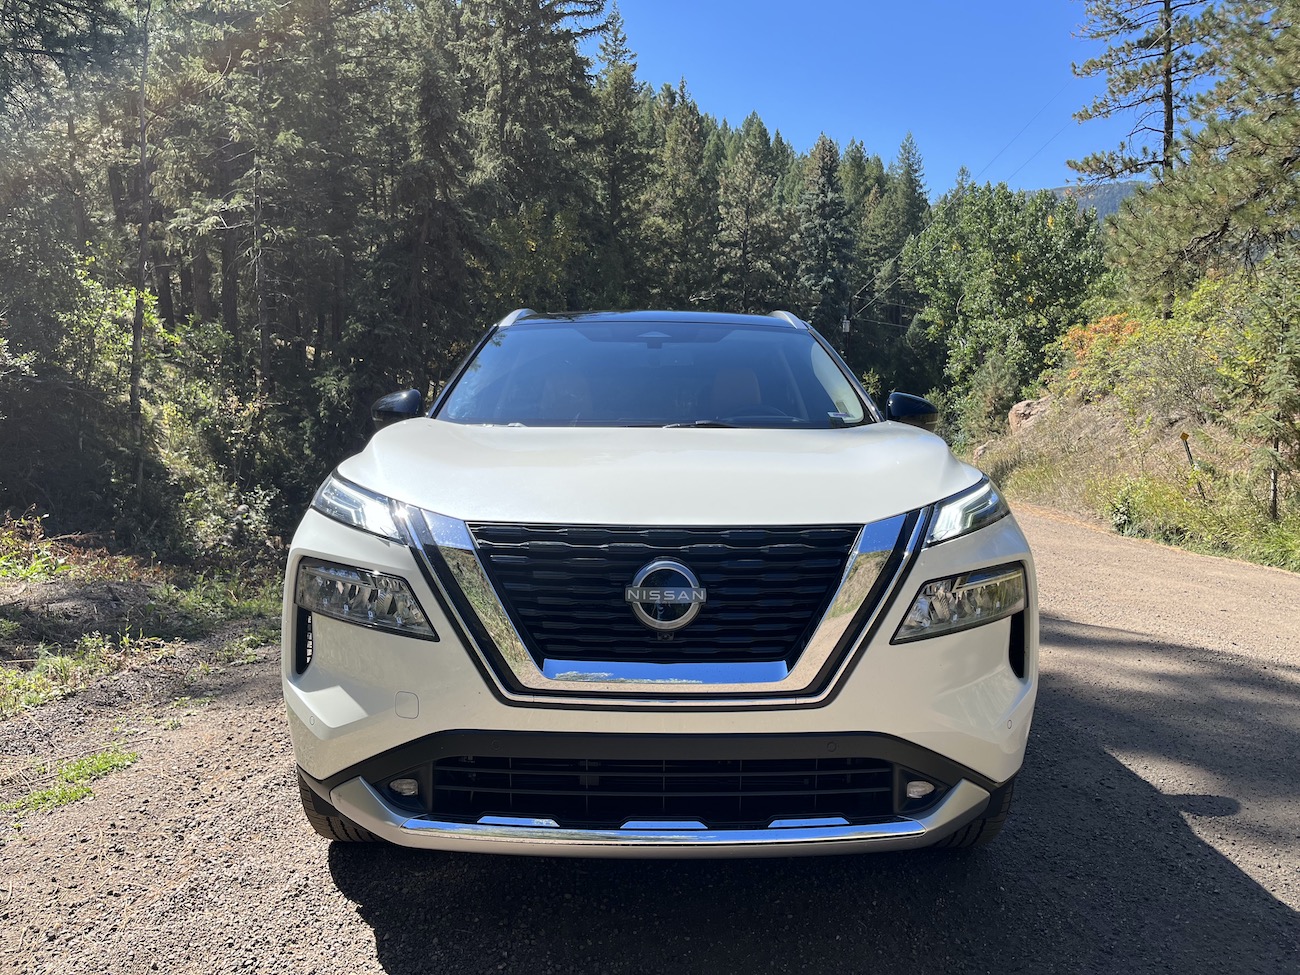 A front view of the 2022 Nissan Rogue